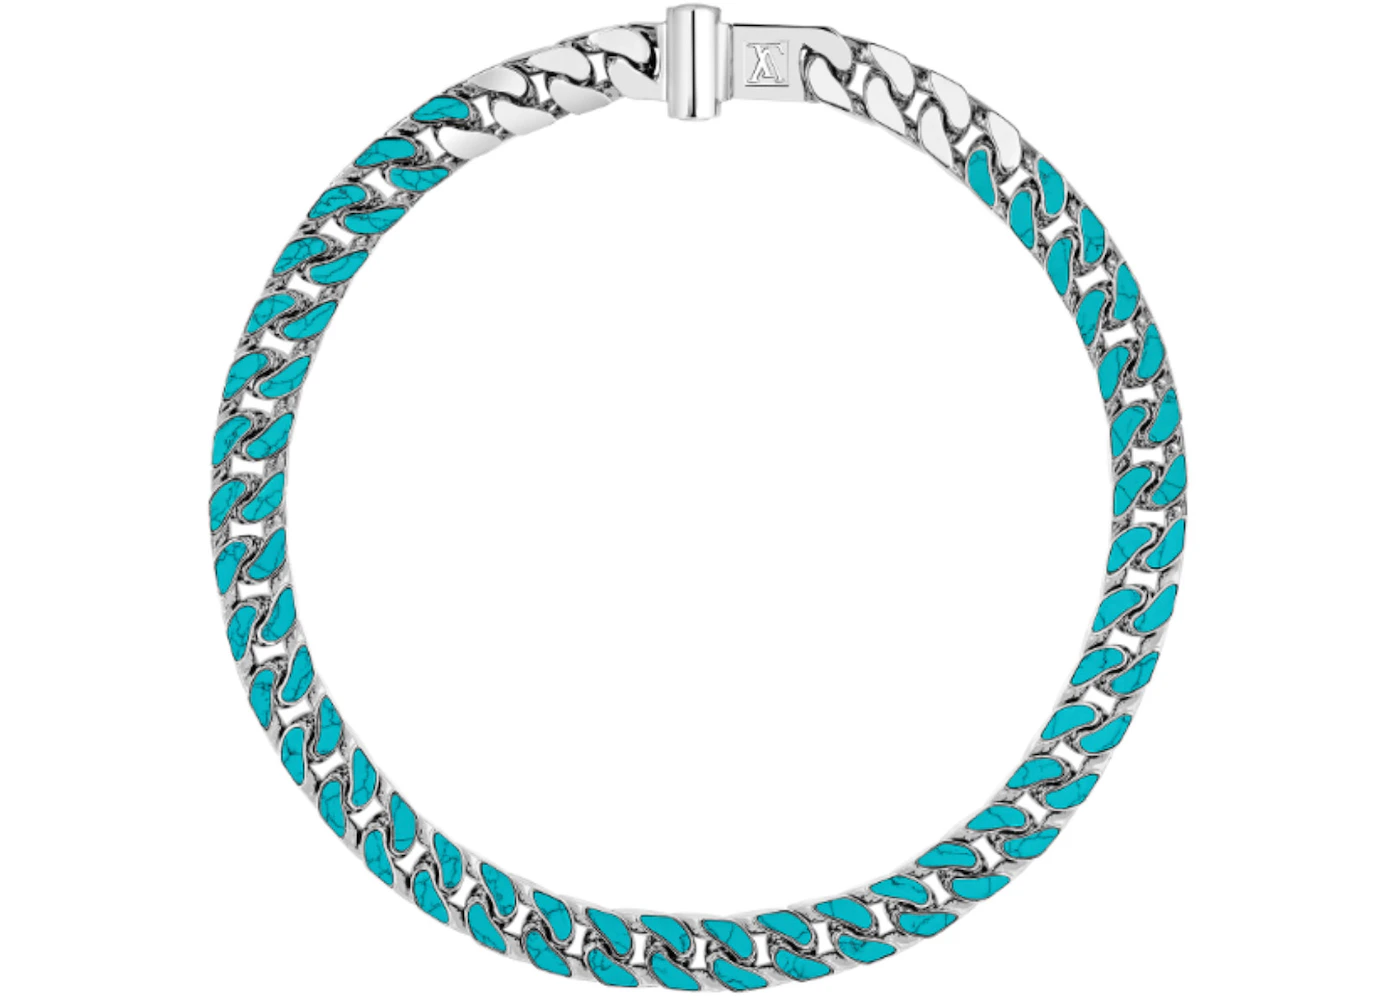 Louis Vuitton Chain Necklace Cloud Blue in Metal with Silver-tone - GB